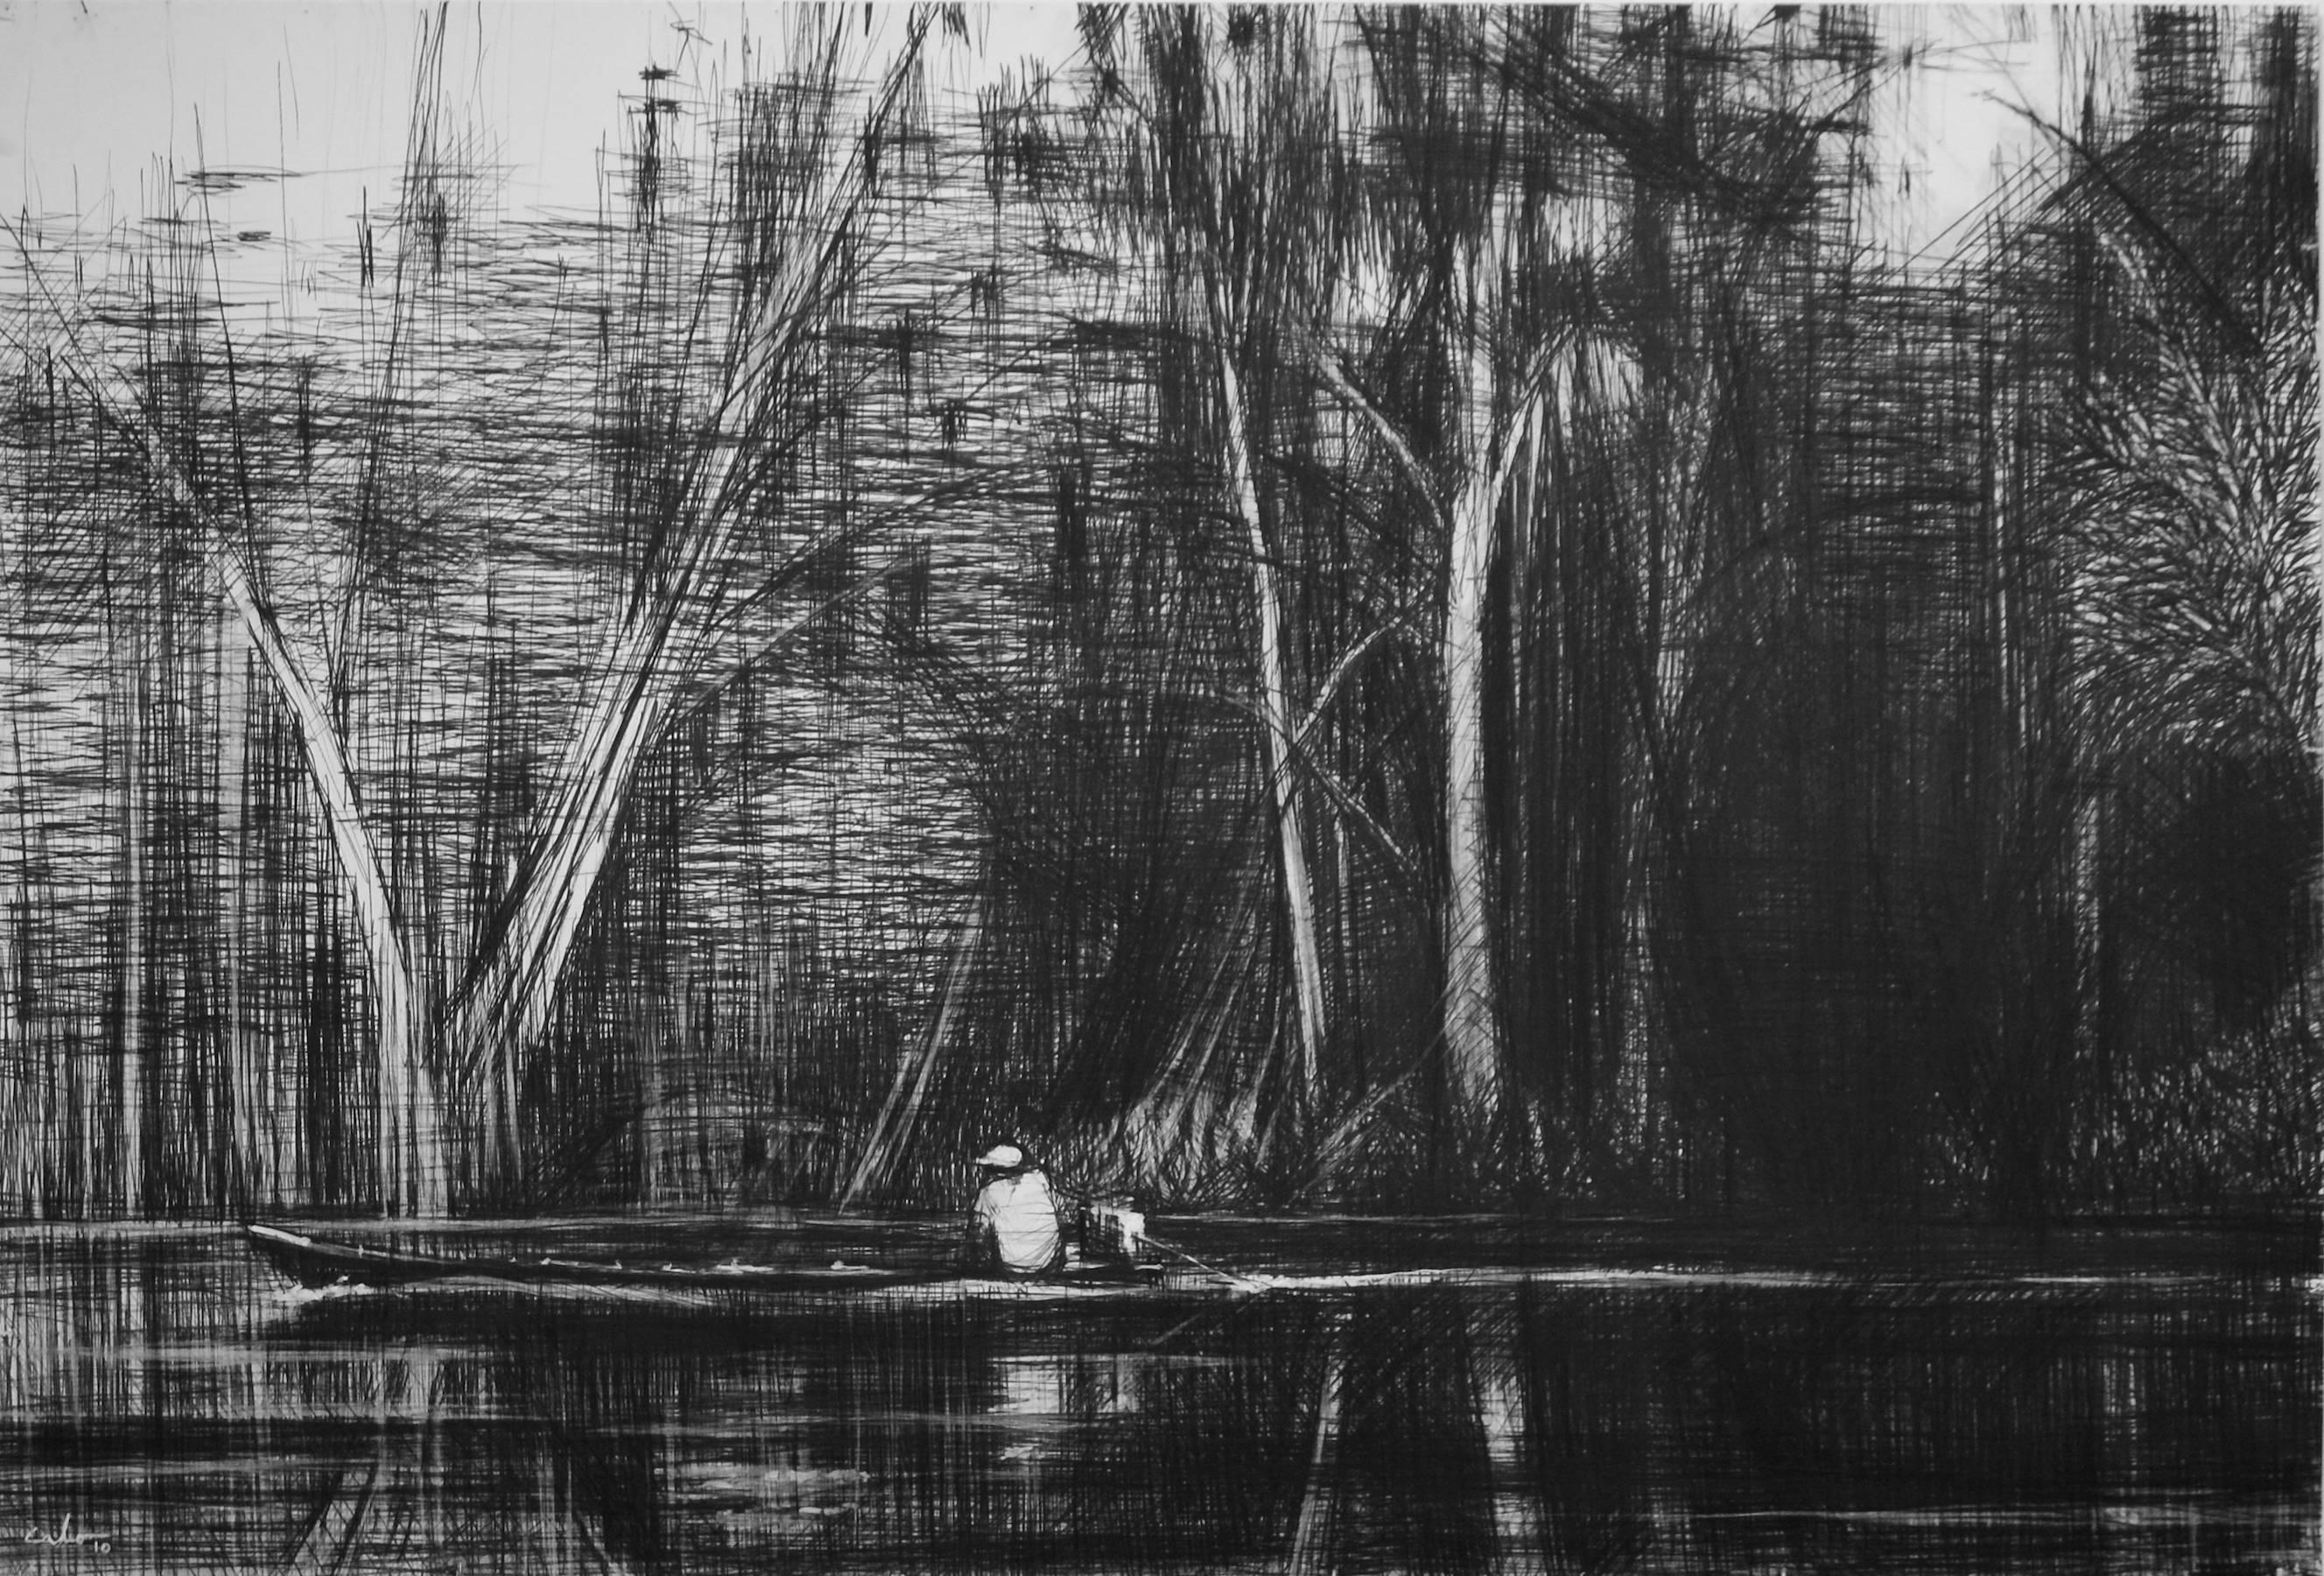 Calo Carratalá Landscape Art - Boat on the Marañón River, Jungle series - Contemporary Drawing, work on paper